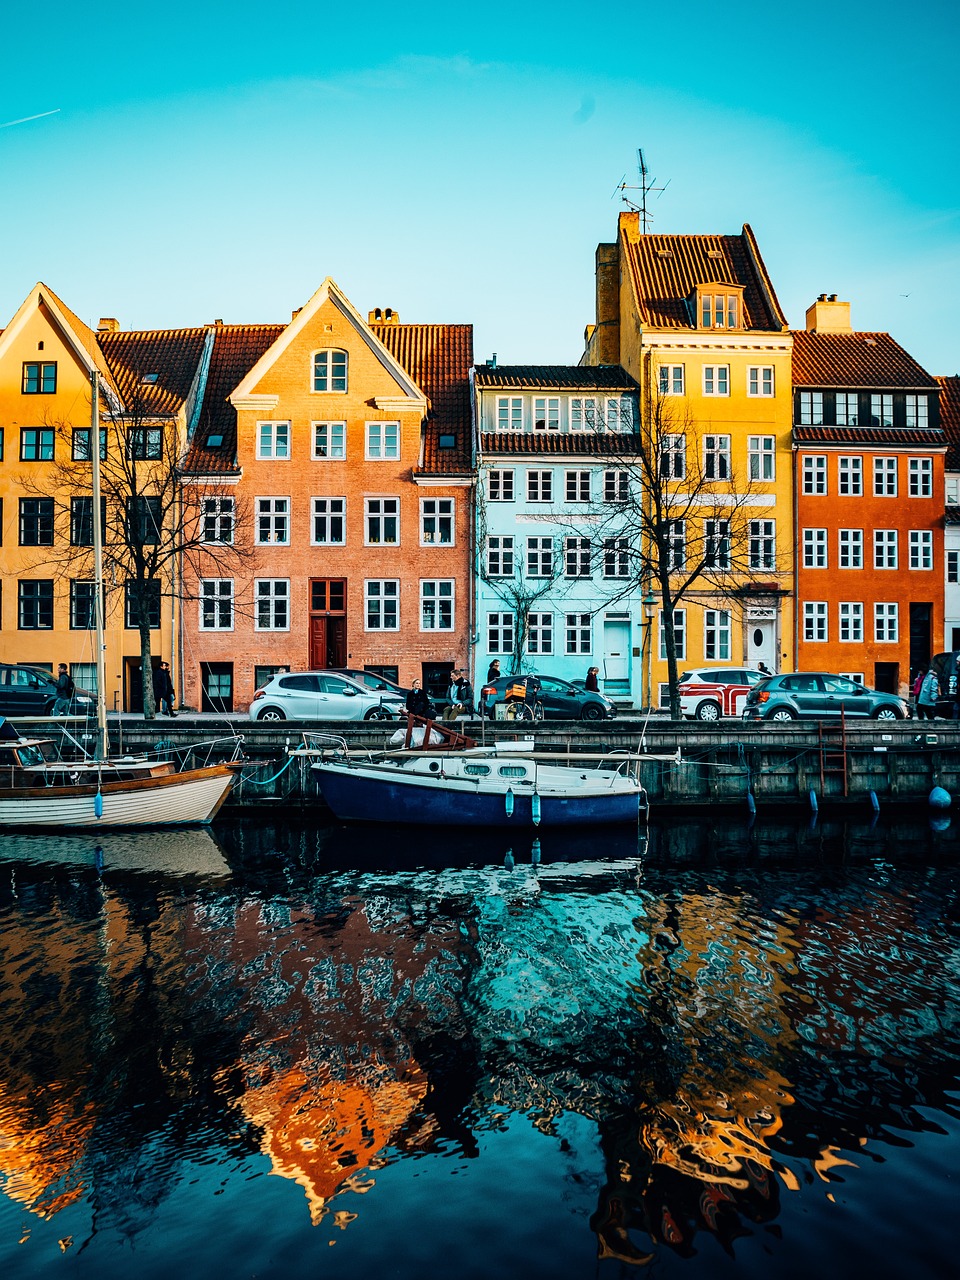 5 Days of Local Food and Sightseeing in Copenhagen